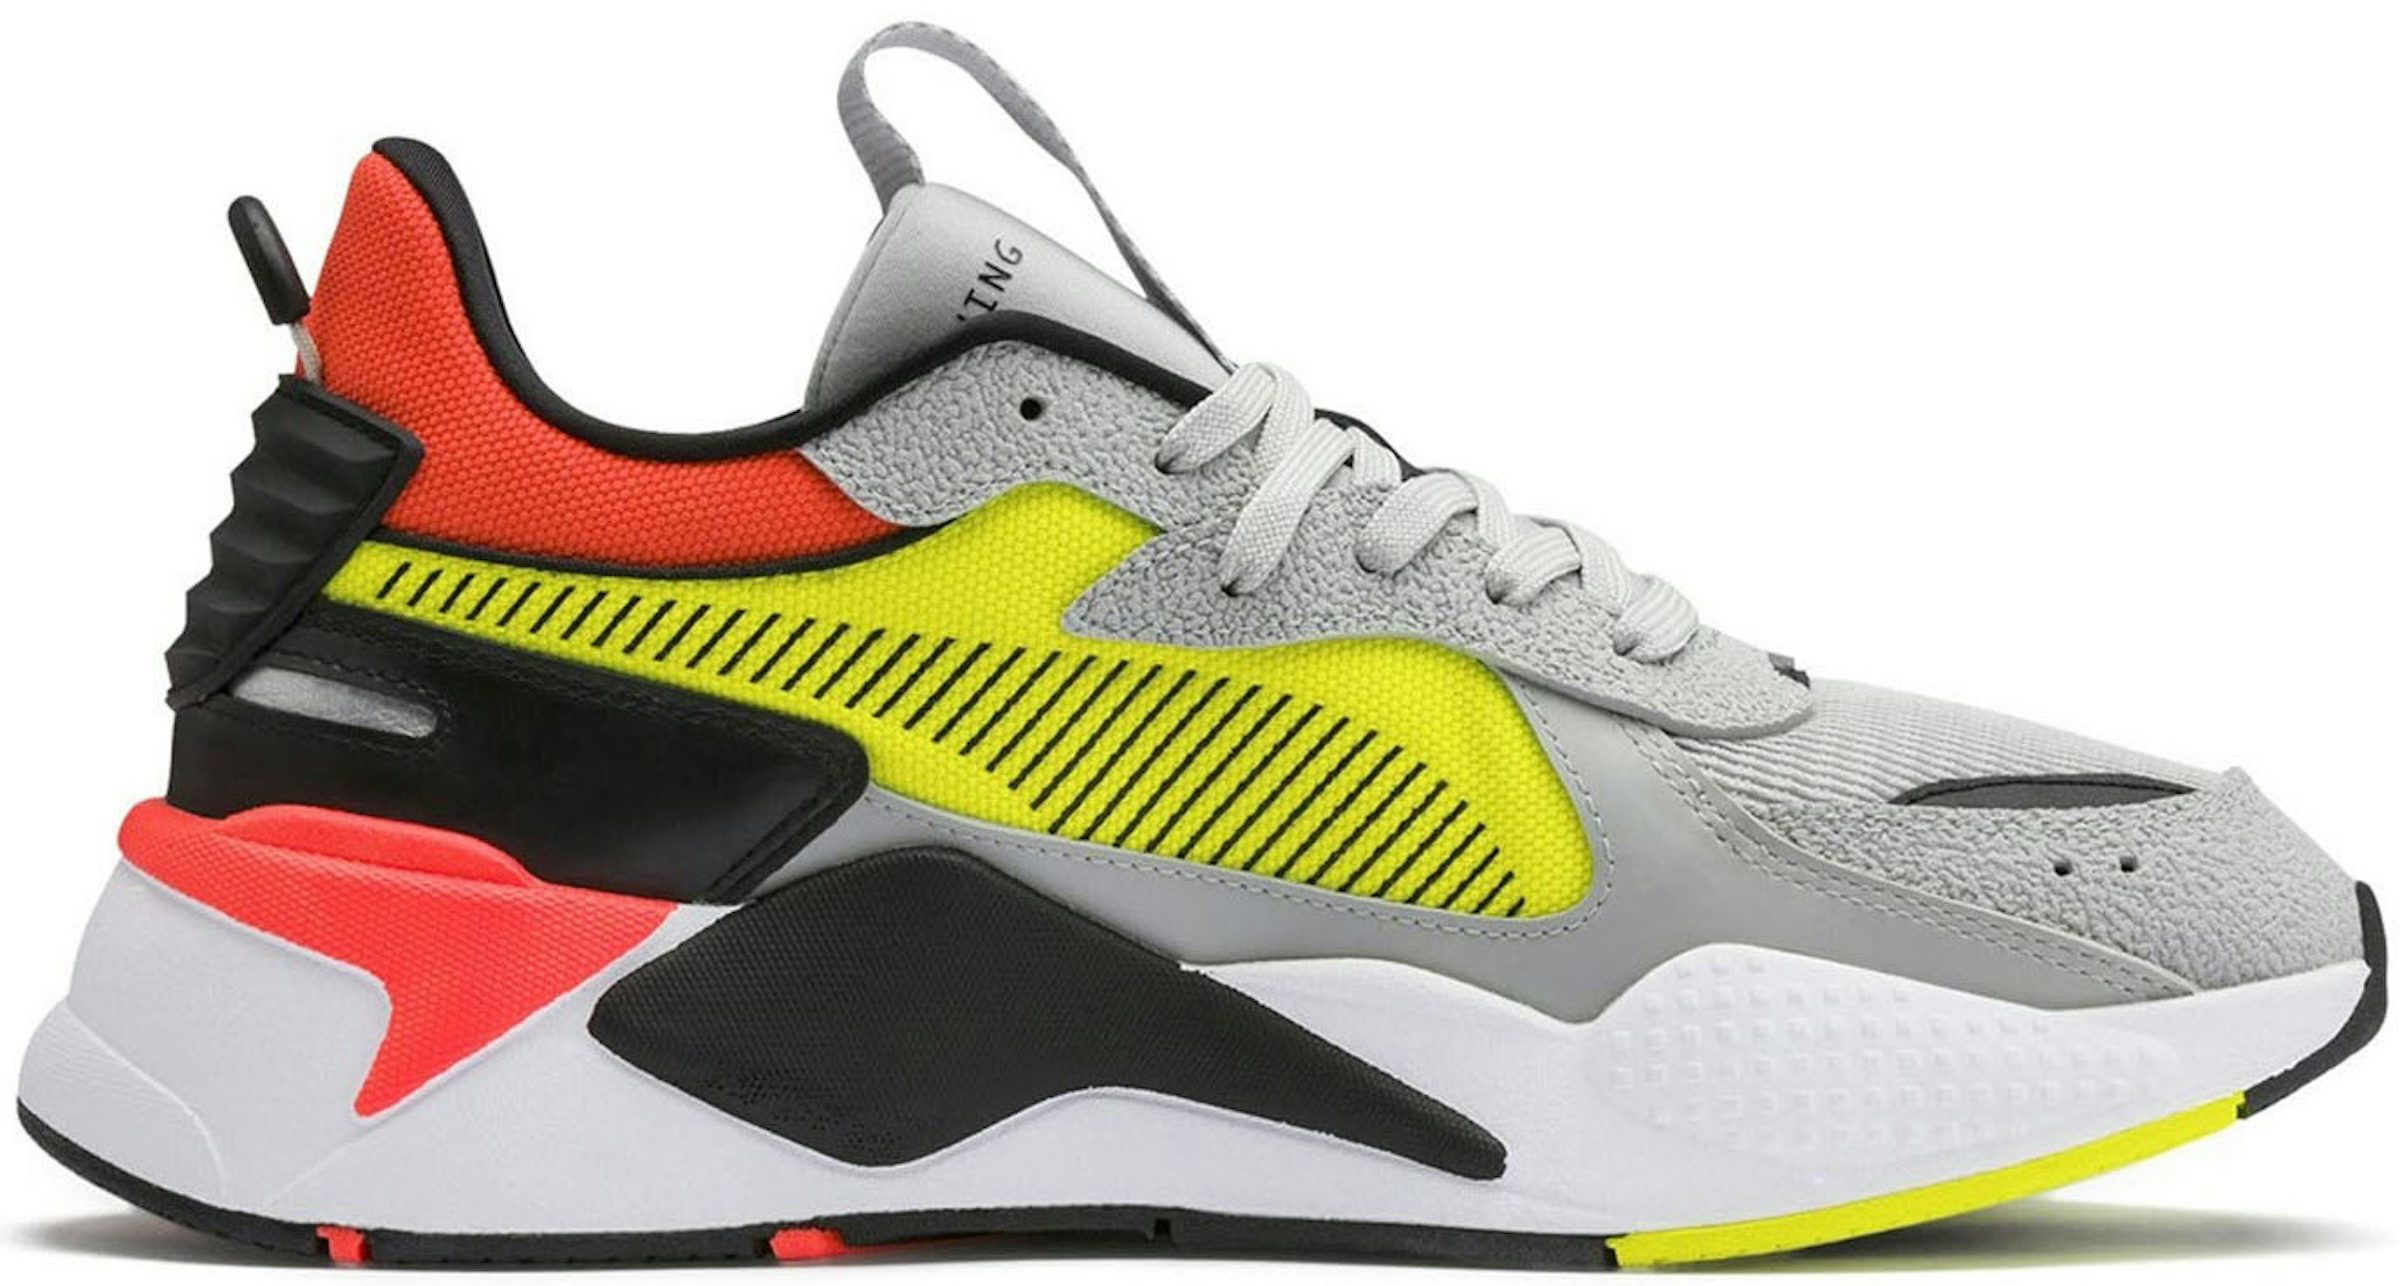 Vader fage Absoluut Lounge Puma RS-X Harddrive Grey Yellow Red Men's - 369818-01 - US